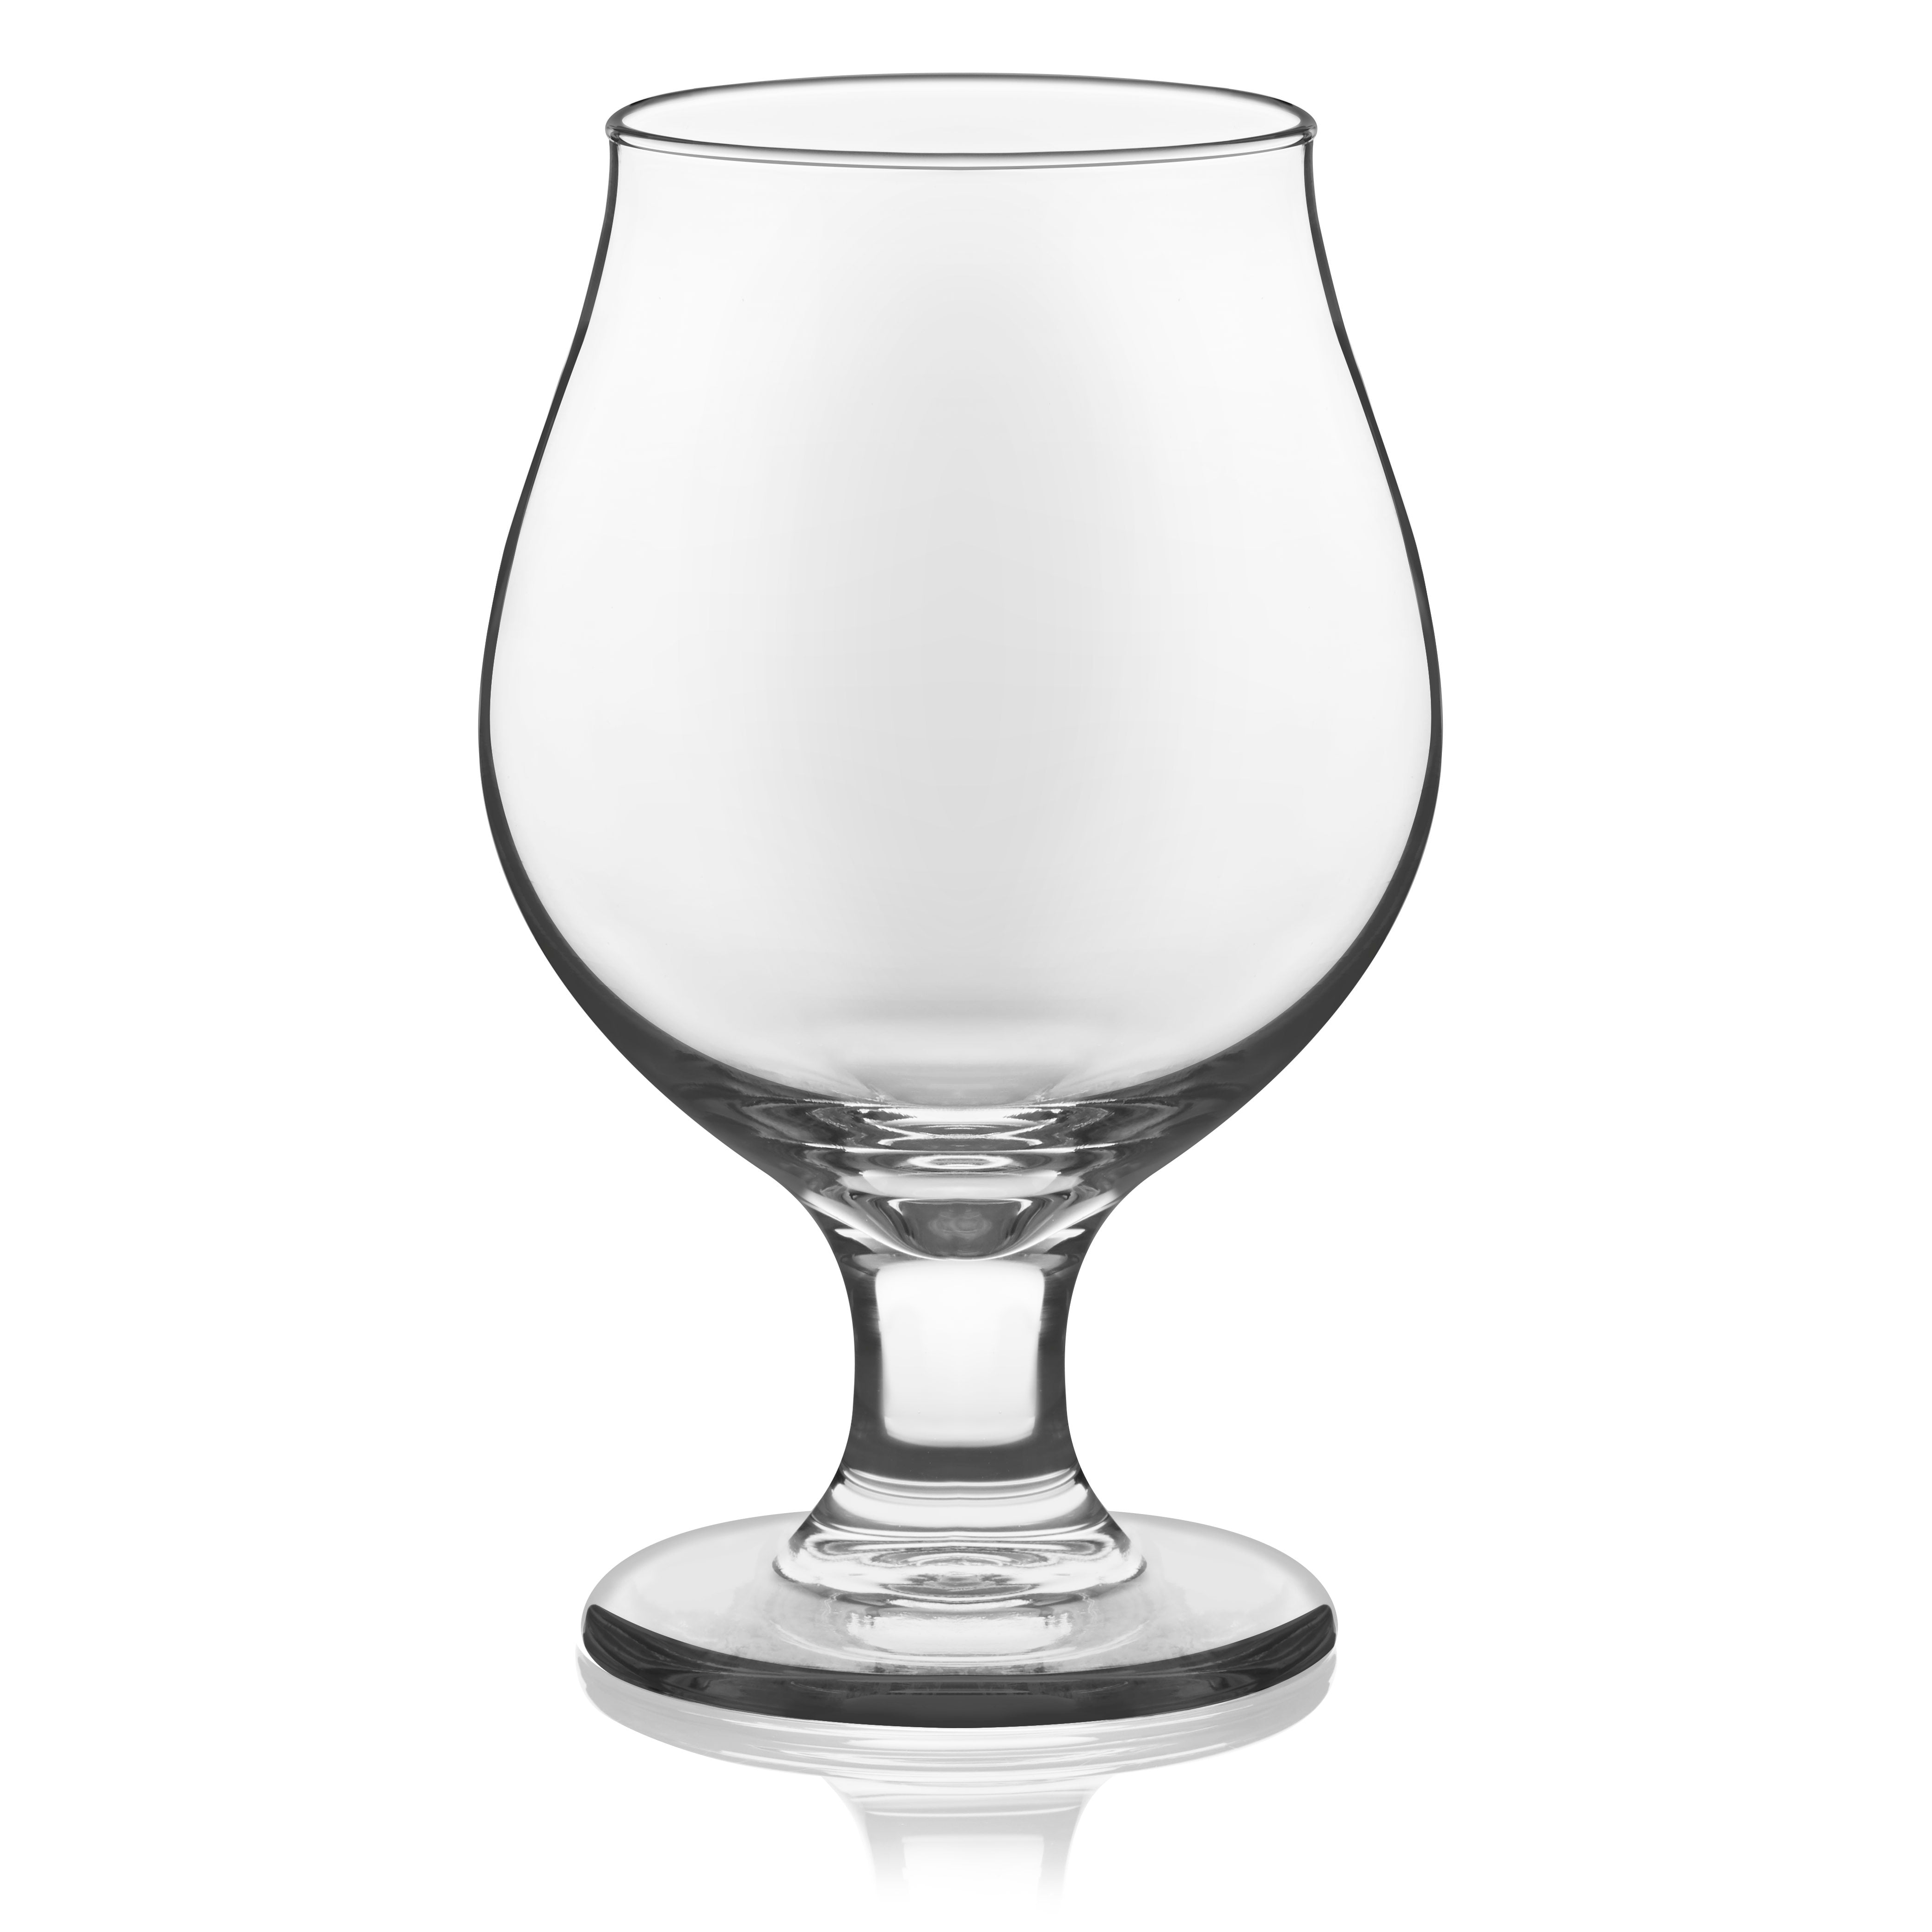 Libbey 1690, 16 Oz Altitude Tall Beer Glass, 2 DZ